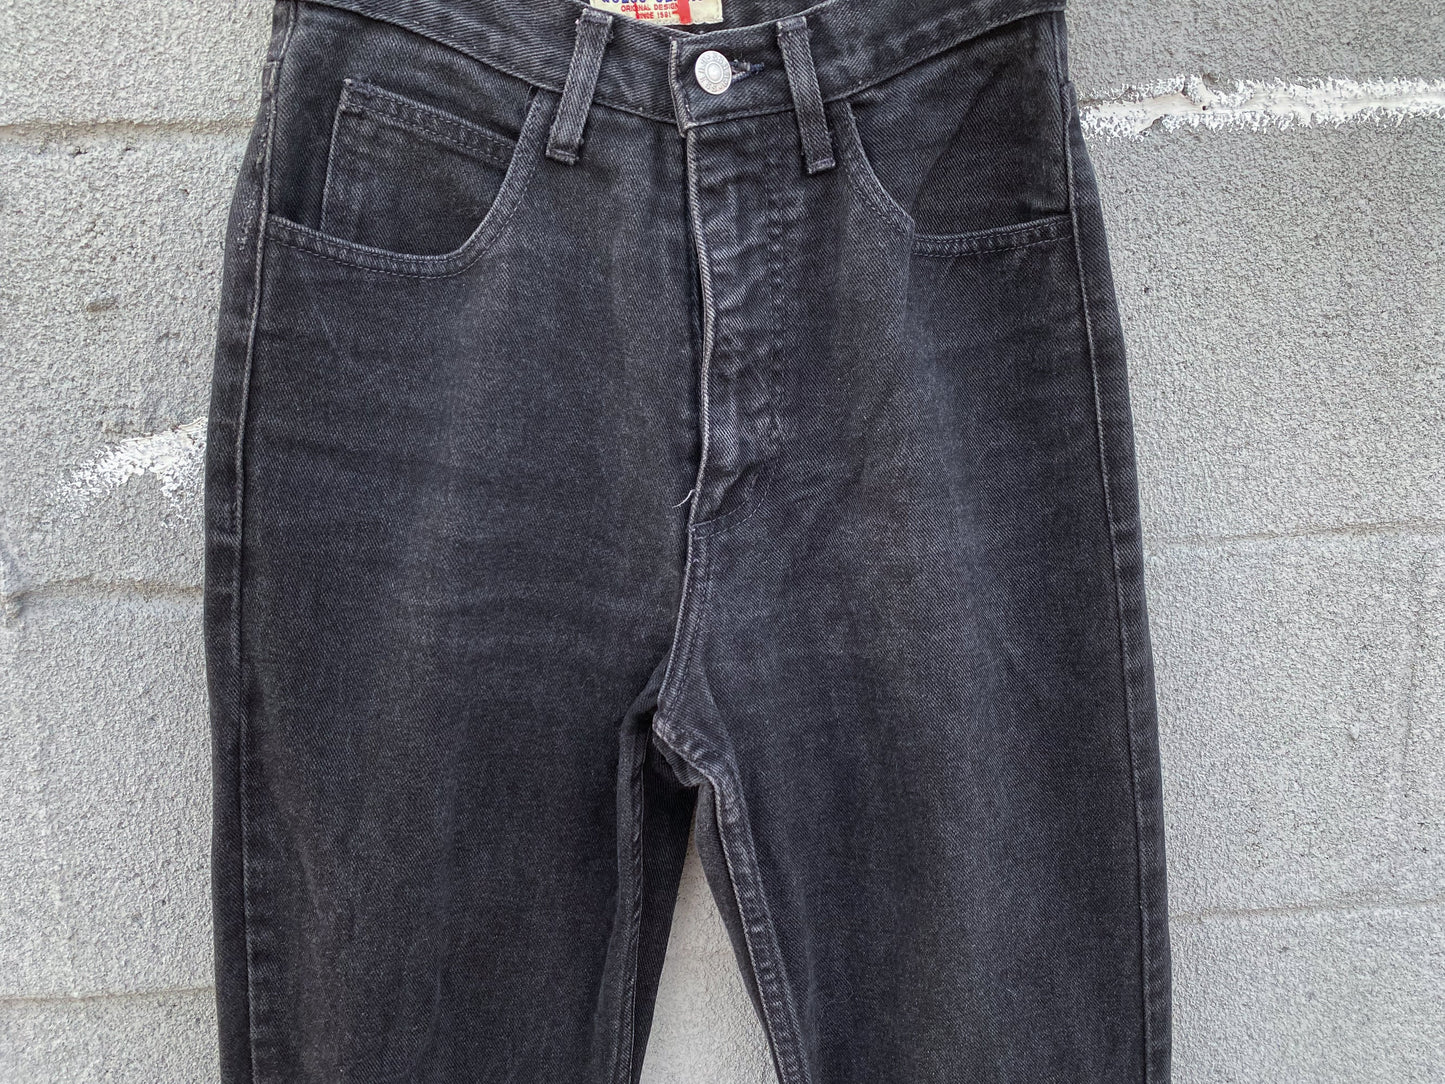 90's Guess High Rise Faded Black Jeans | 26 x 28